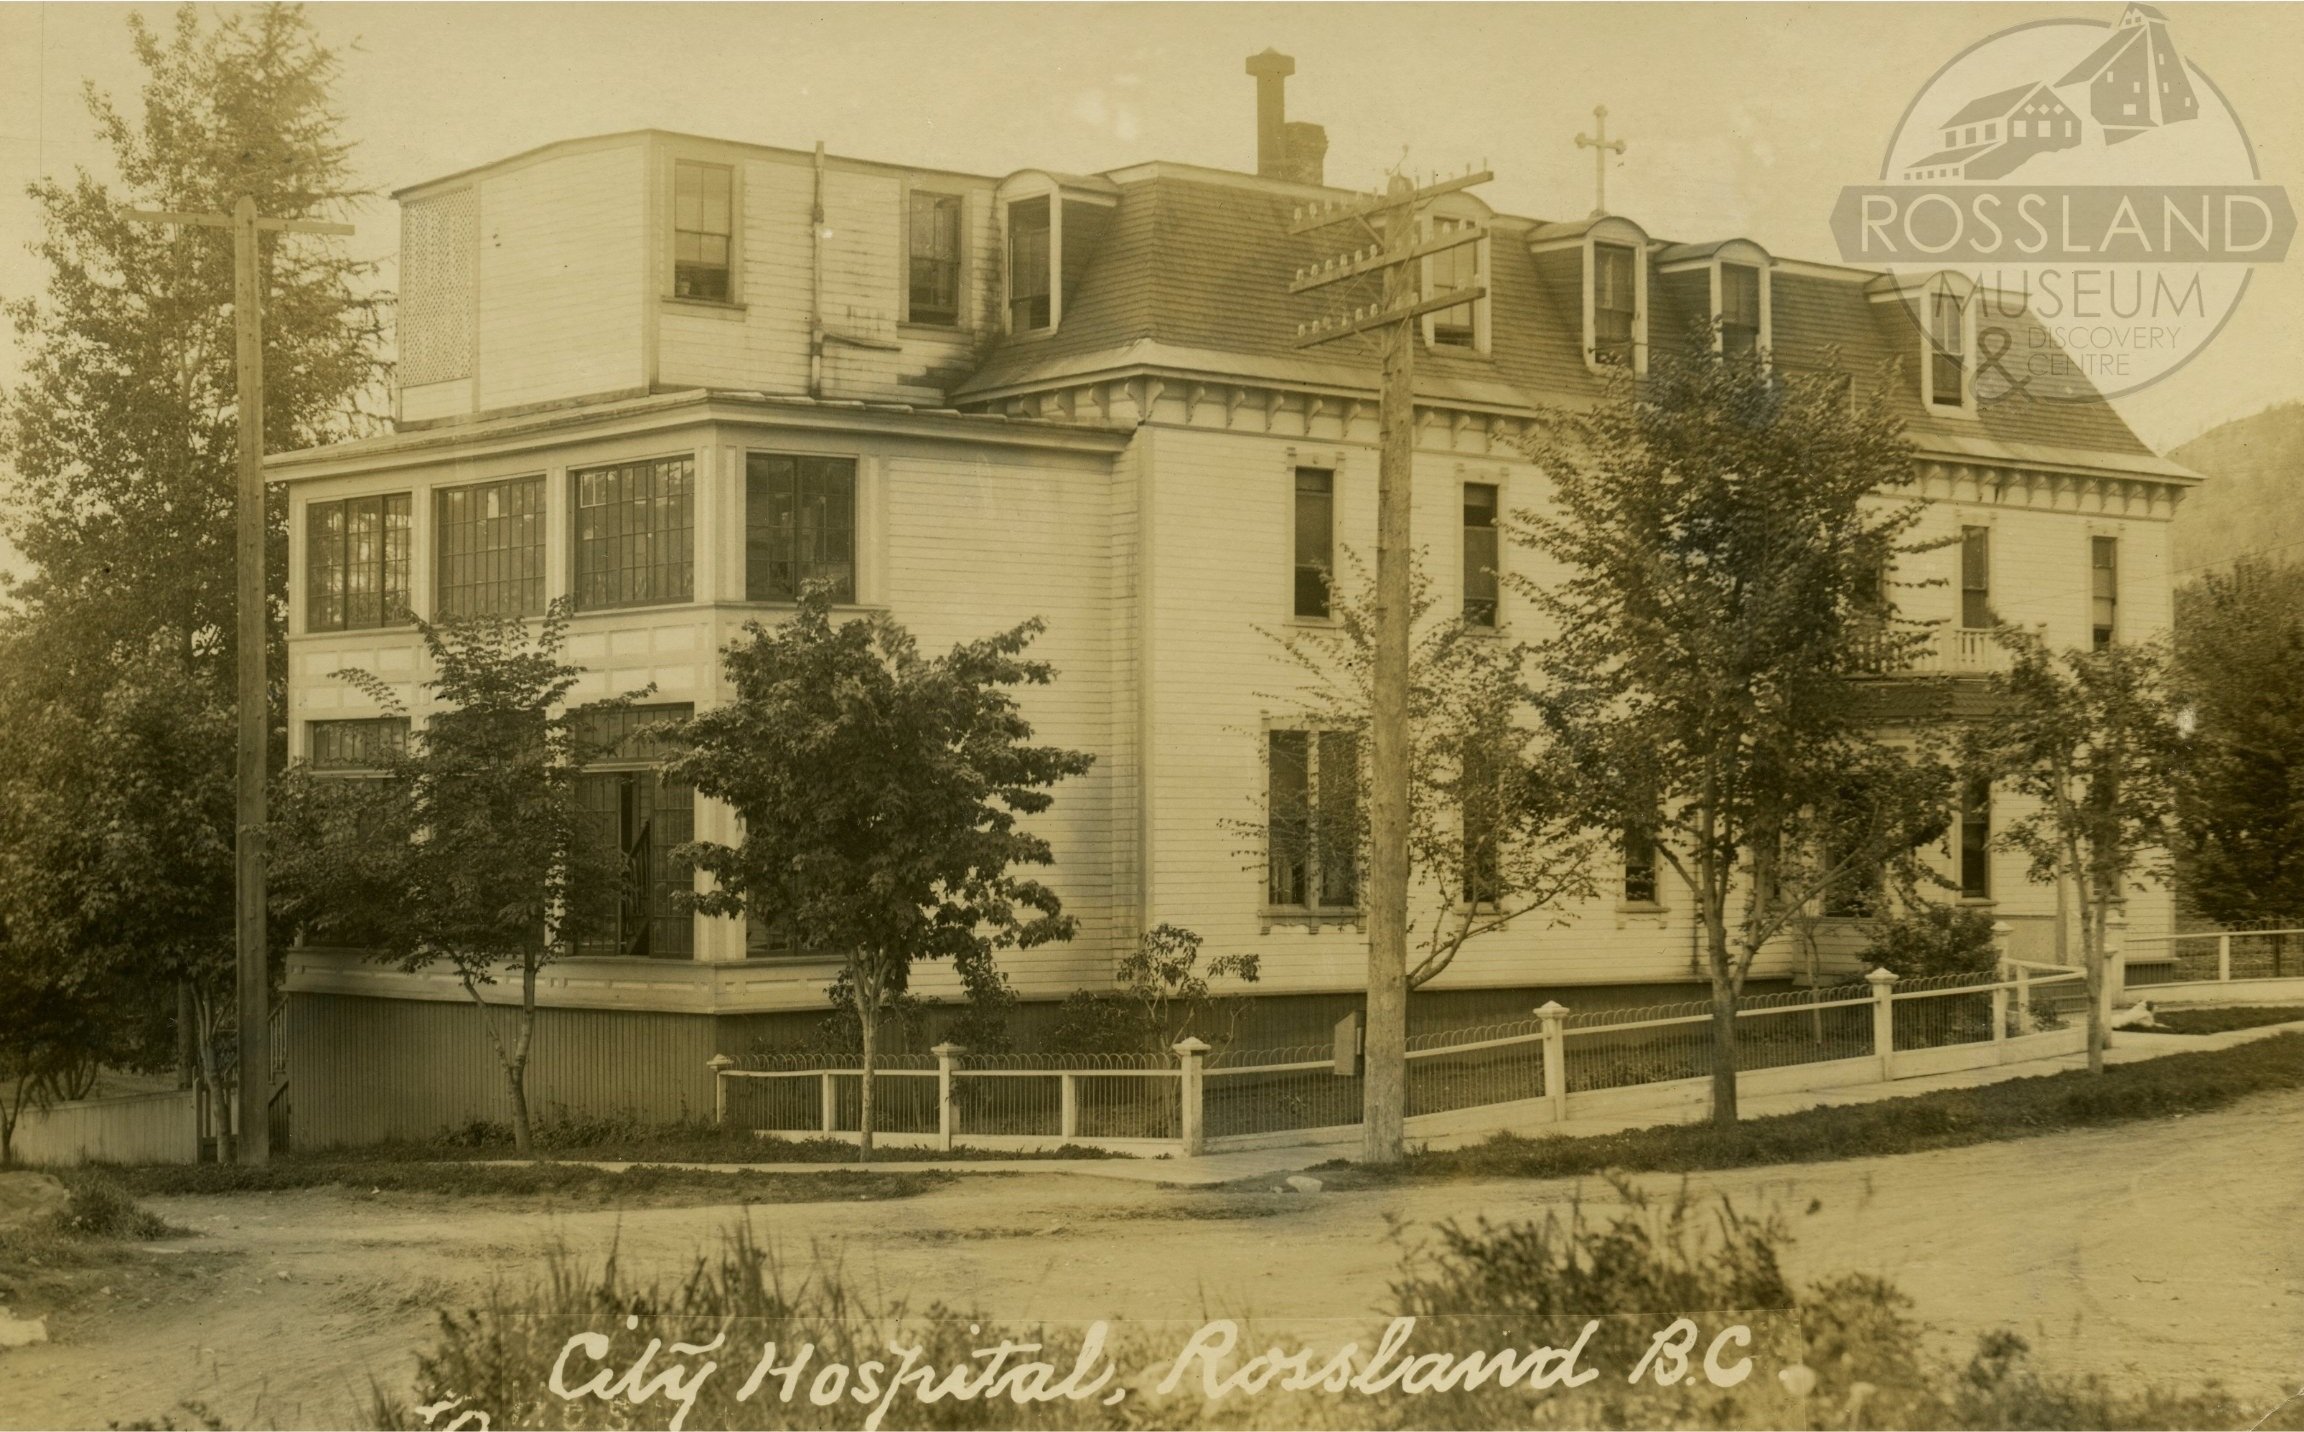   2276.0364 : Mater Misericordiae Hospital, date unknown. 